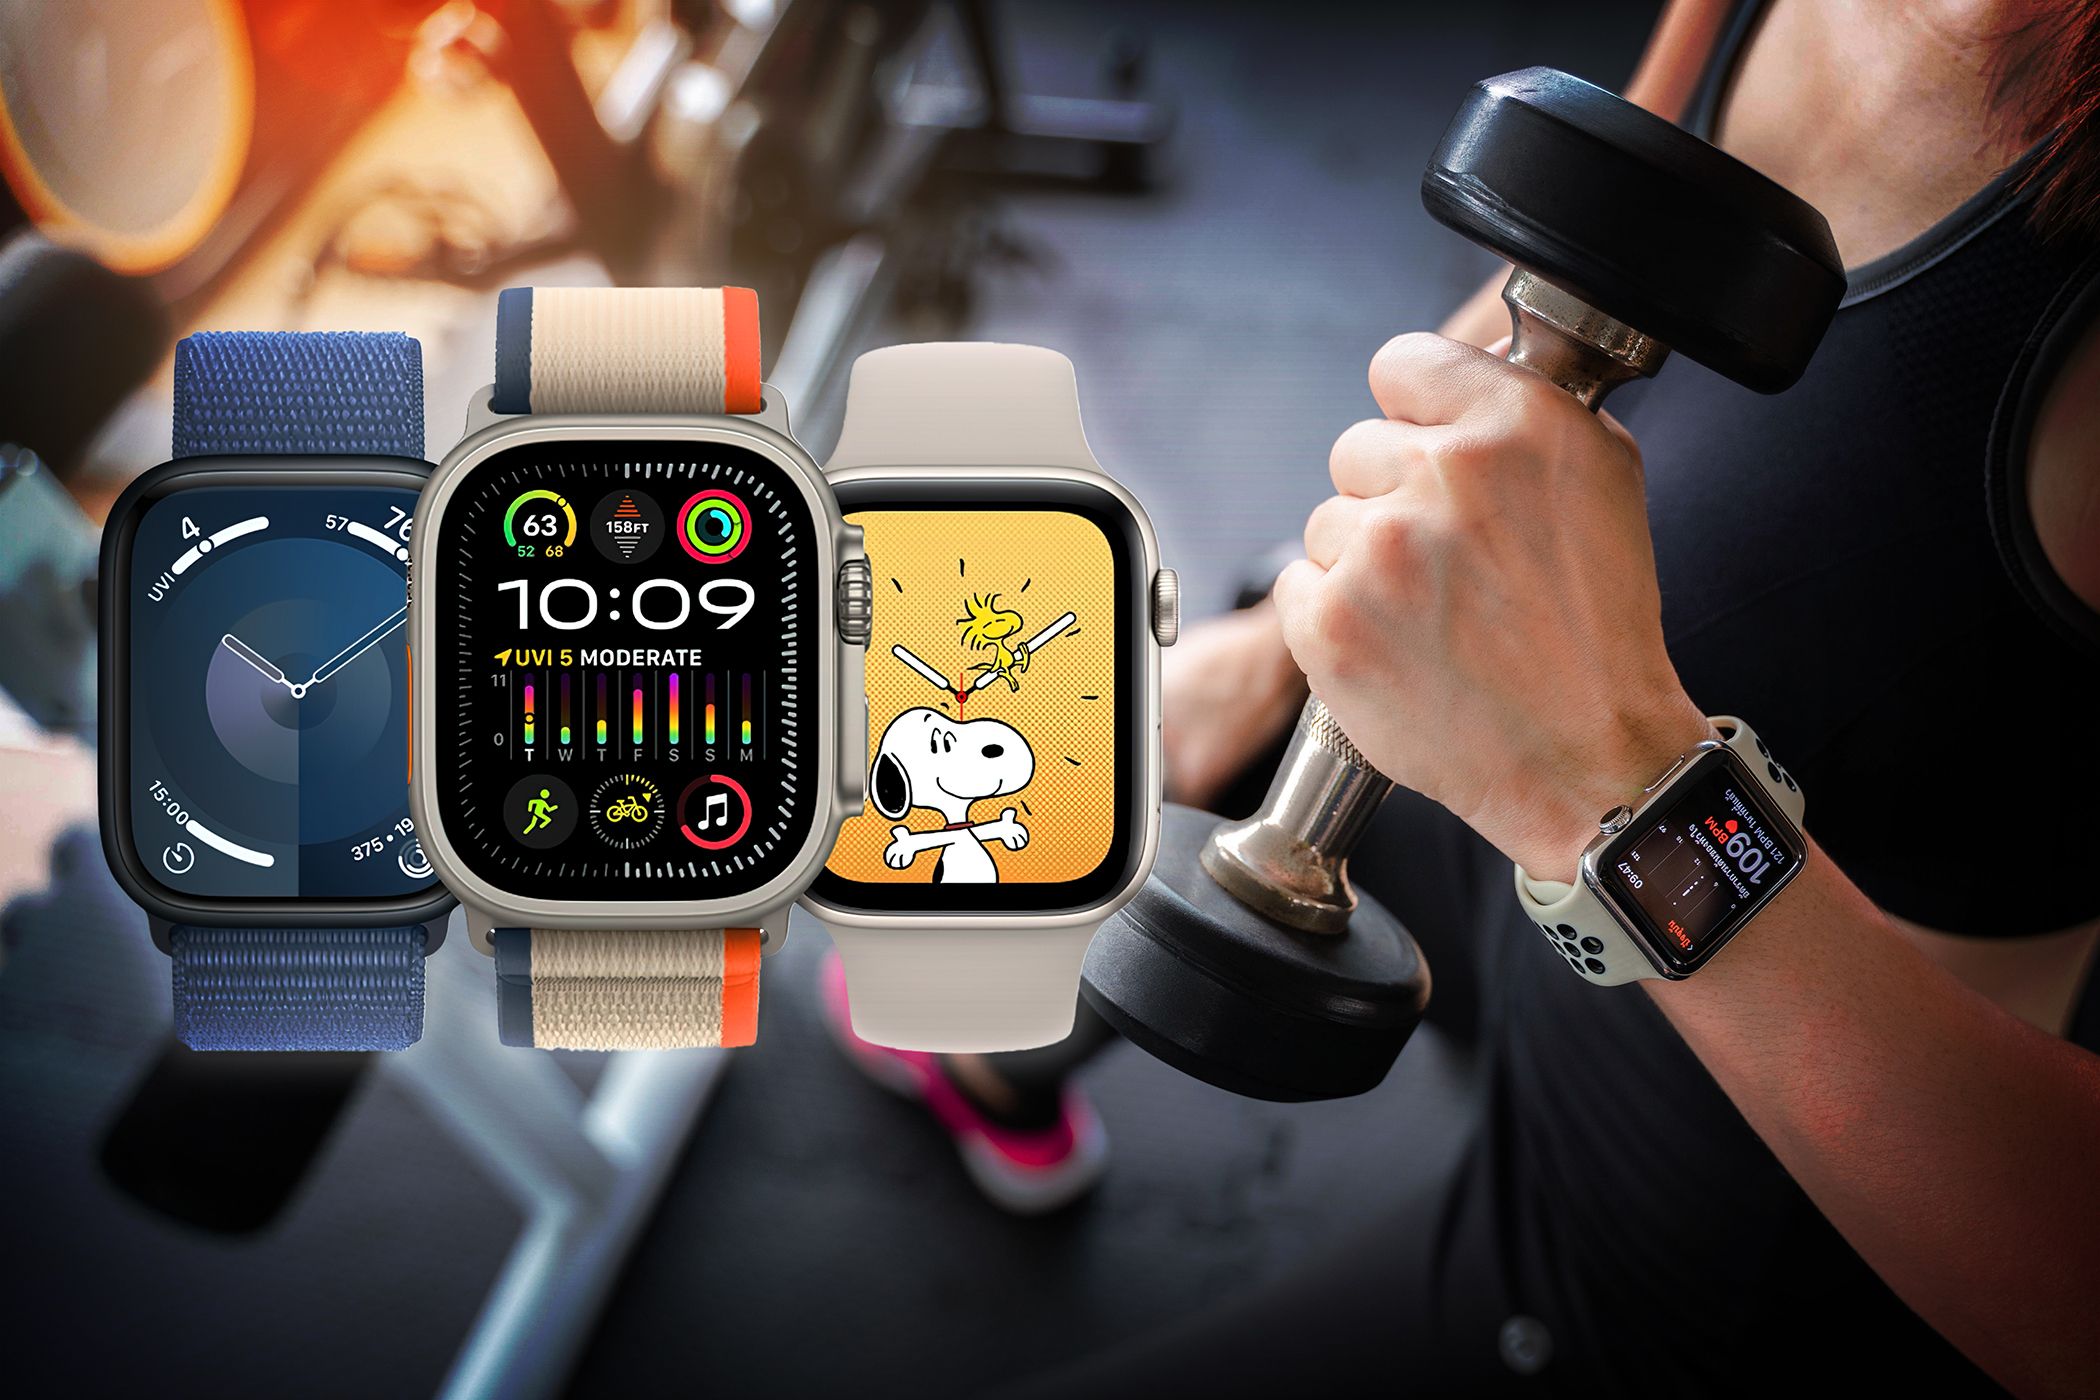 Various Apple Watch models with different bands showcased in a gym setting with a person lifting a dumbbell.